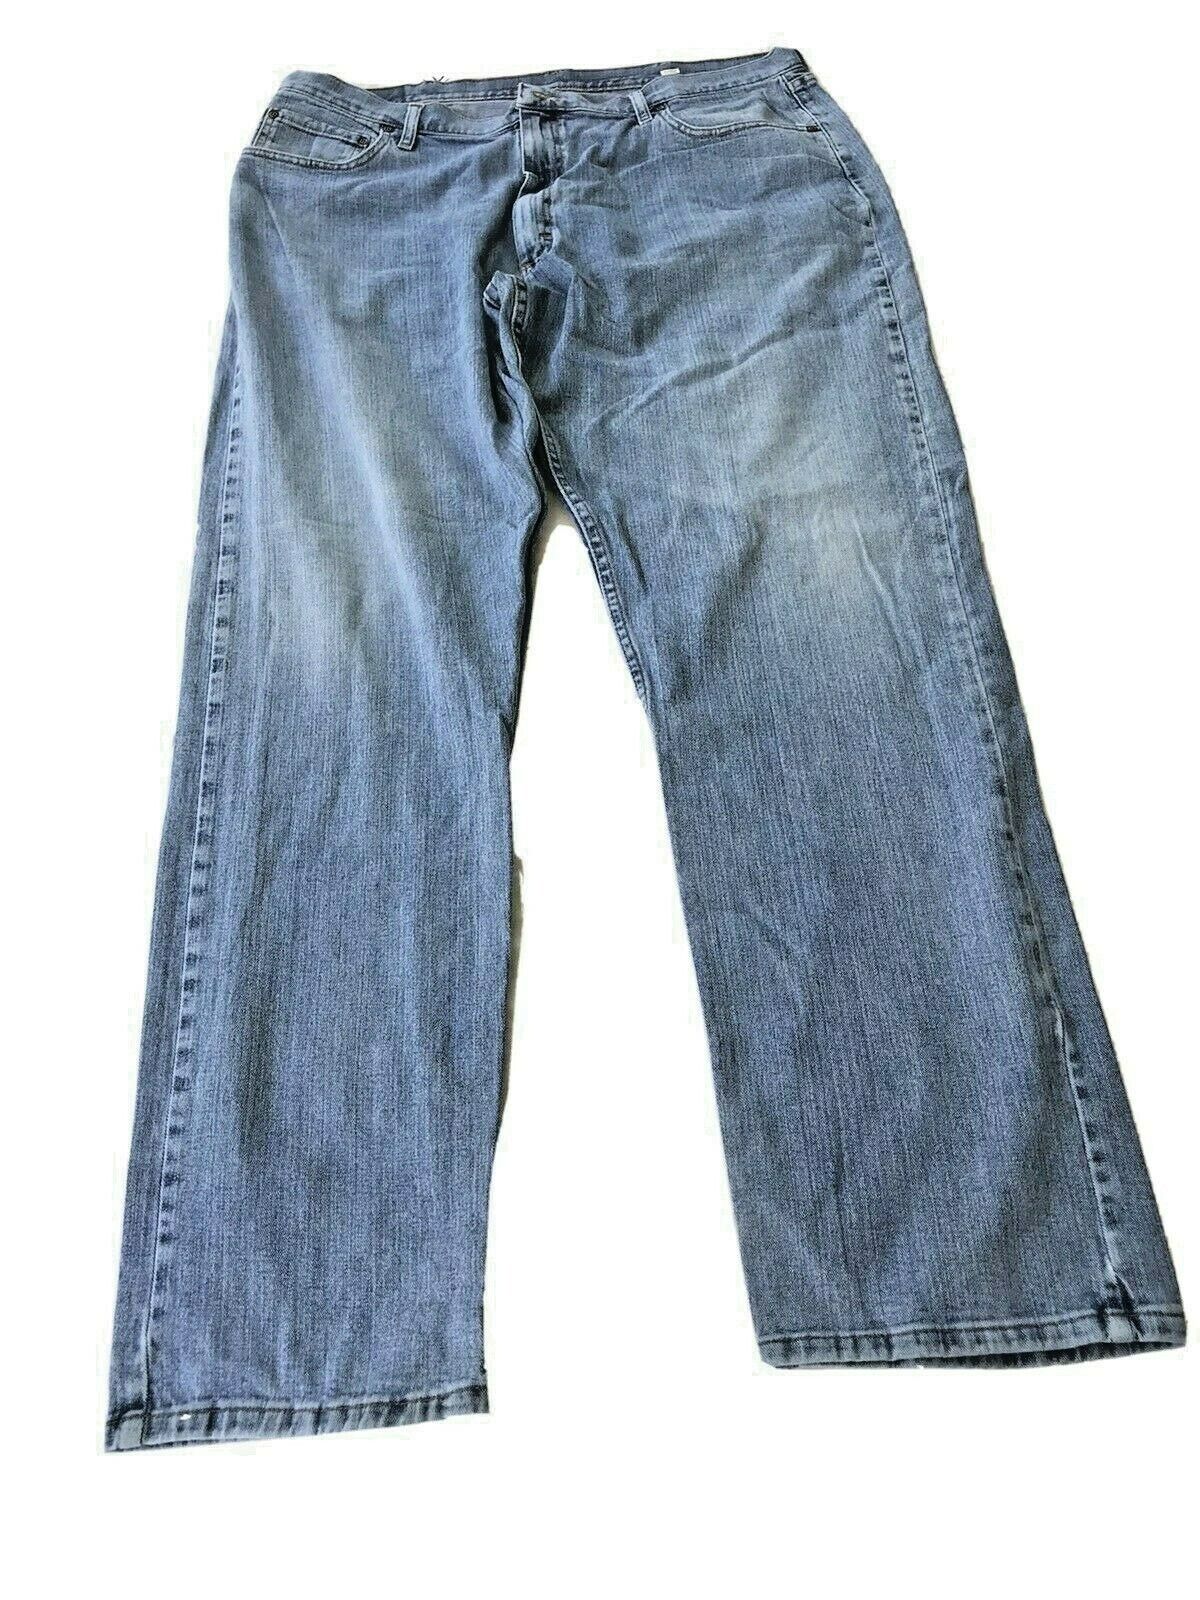 1 Pair Men's Relaxed Fit Wrangler Work Jeans Cotton Spandex 38x34 9WRLAVS  Preown | eBay